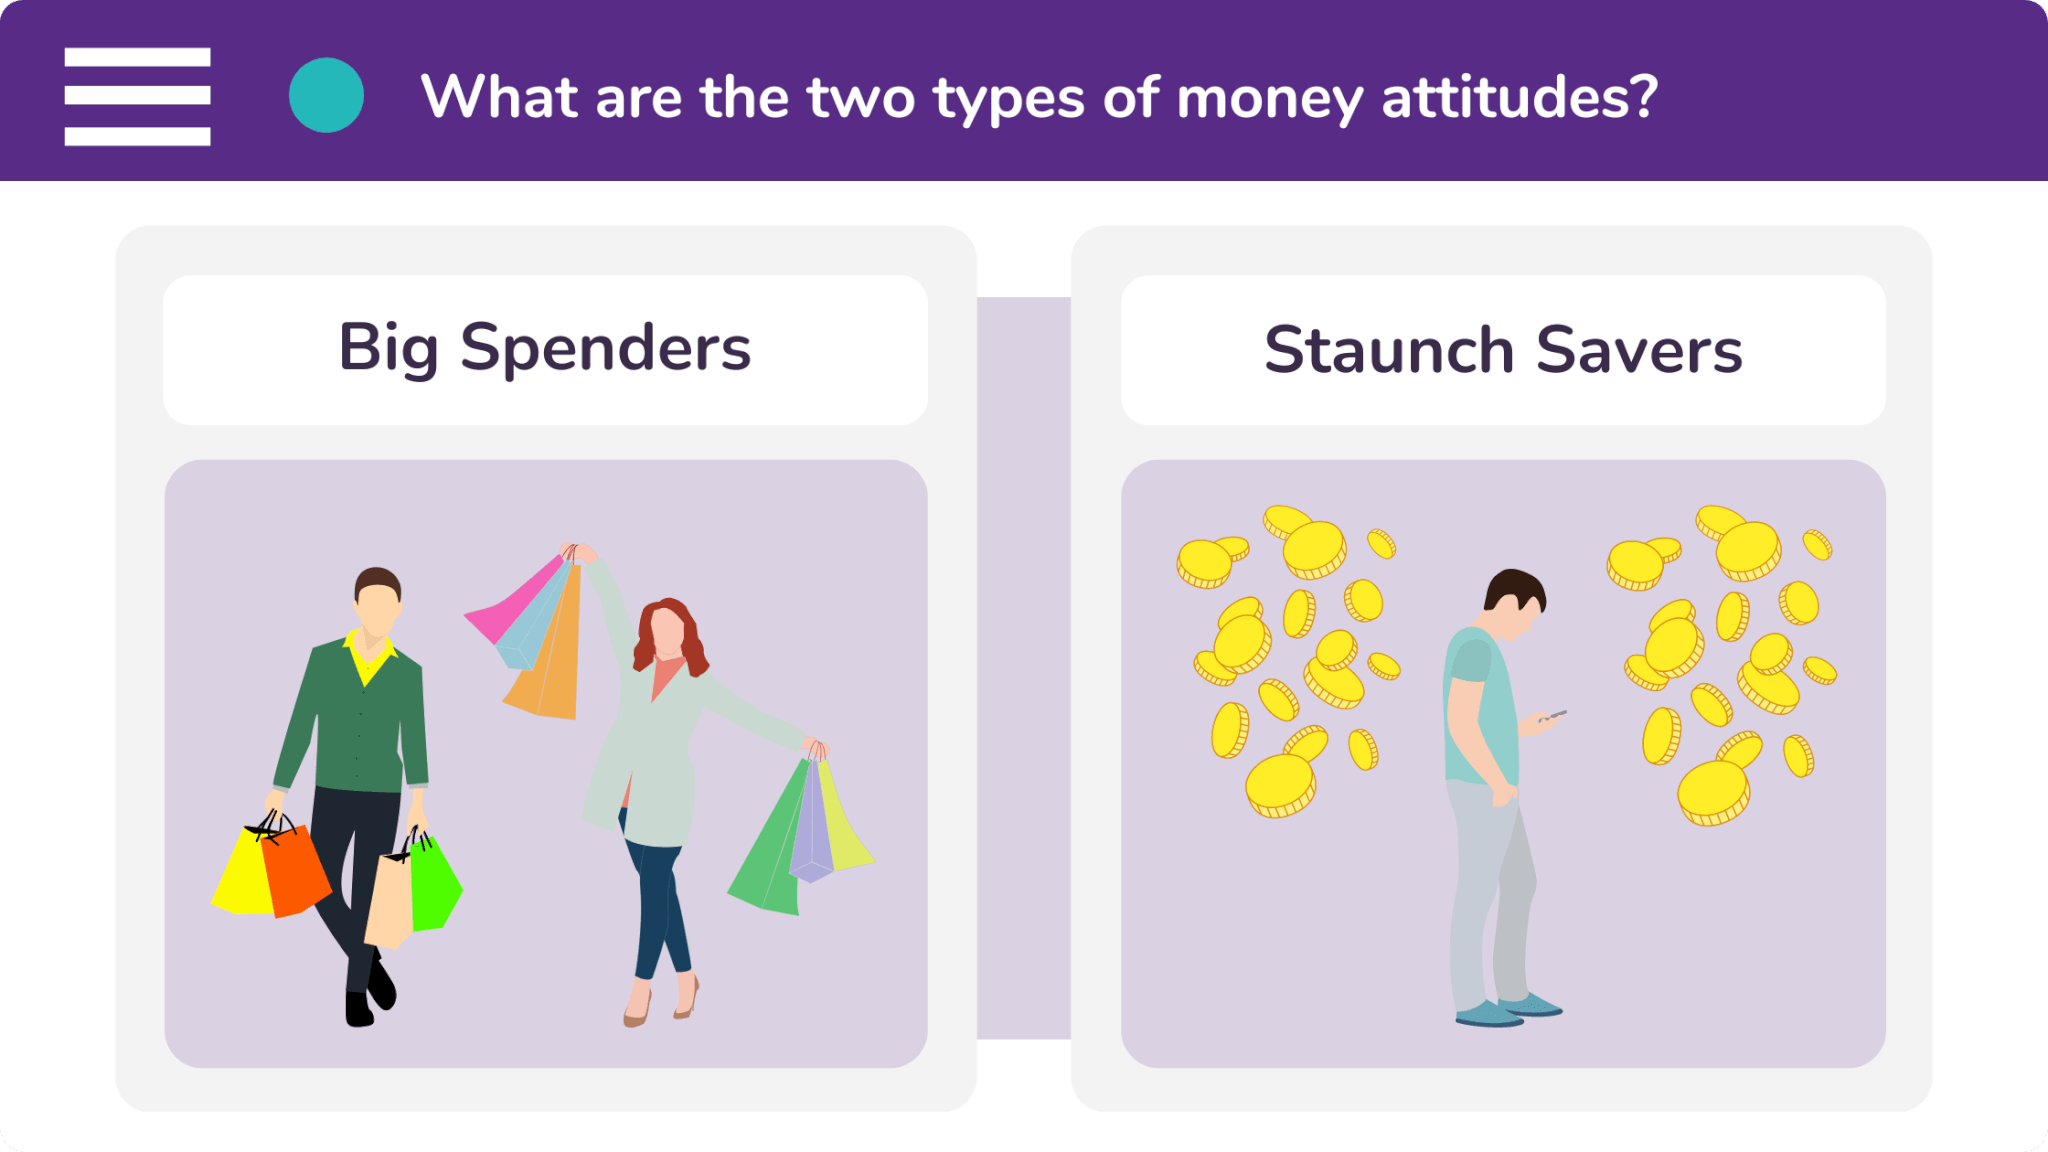 There are two general attitudes towards money: big spenders and staunch savers.